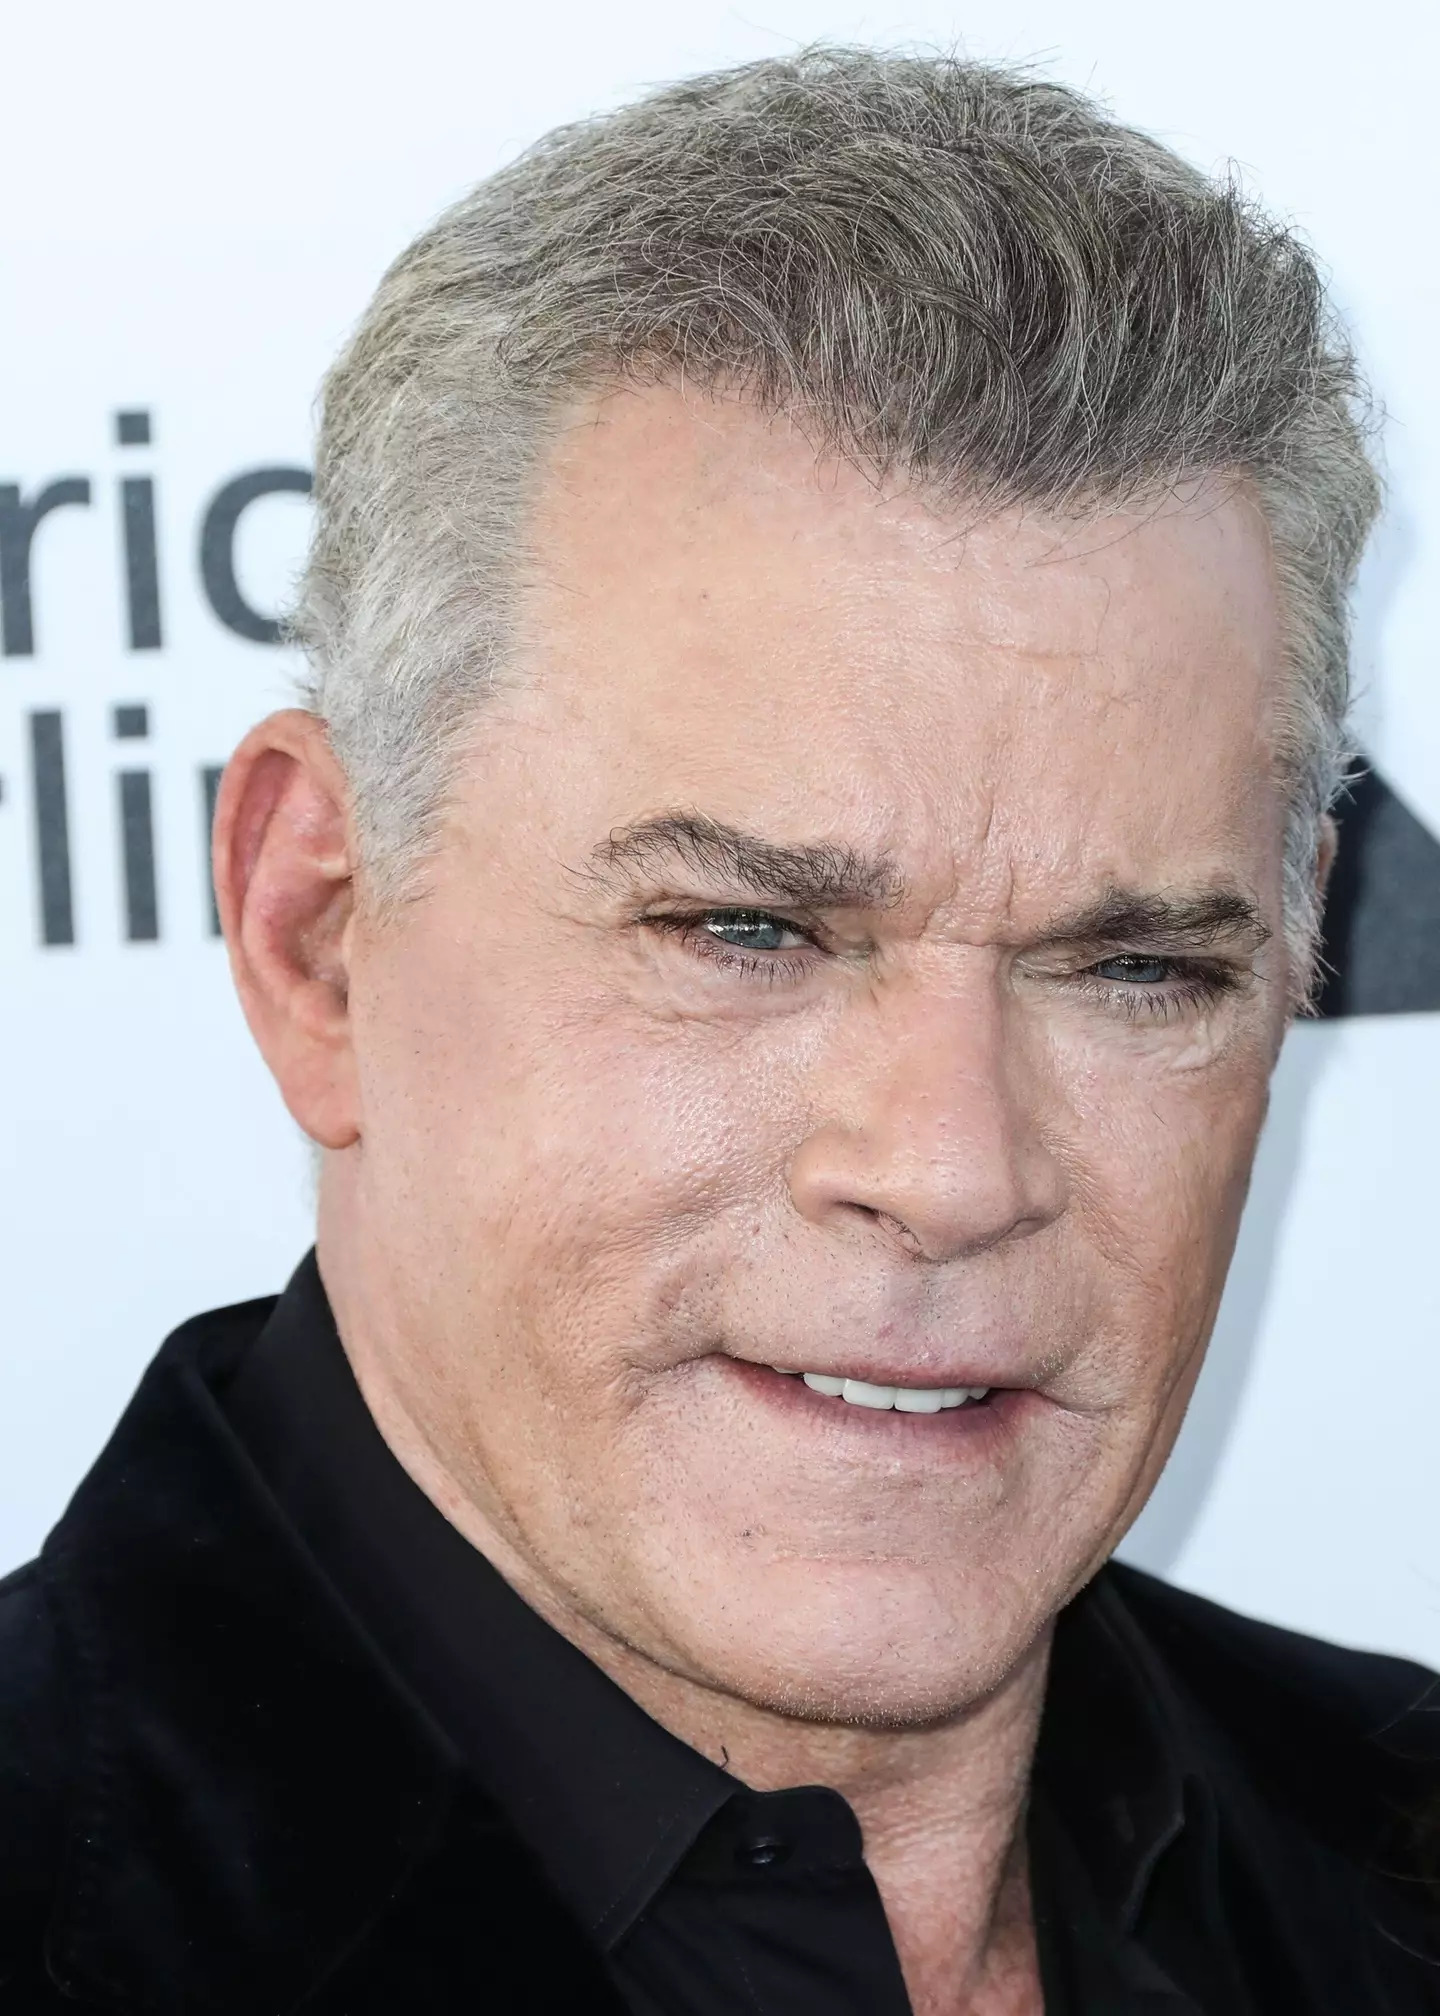 Ray Liotta has died aged 67.